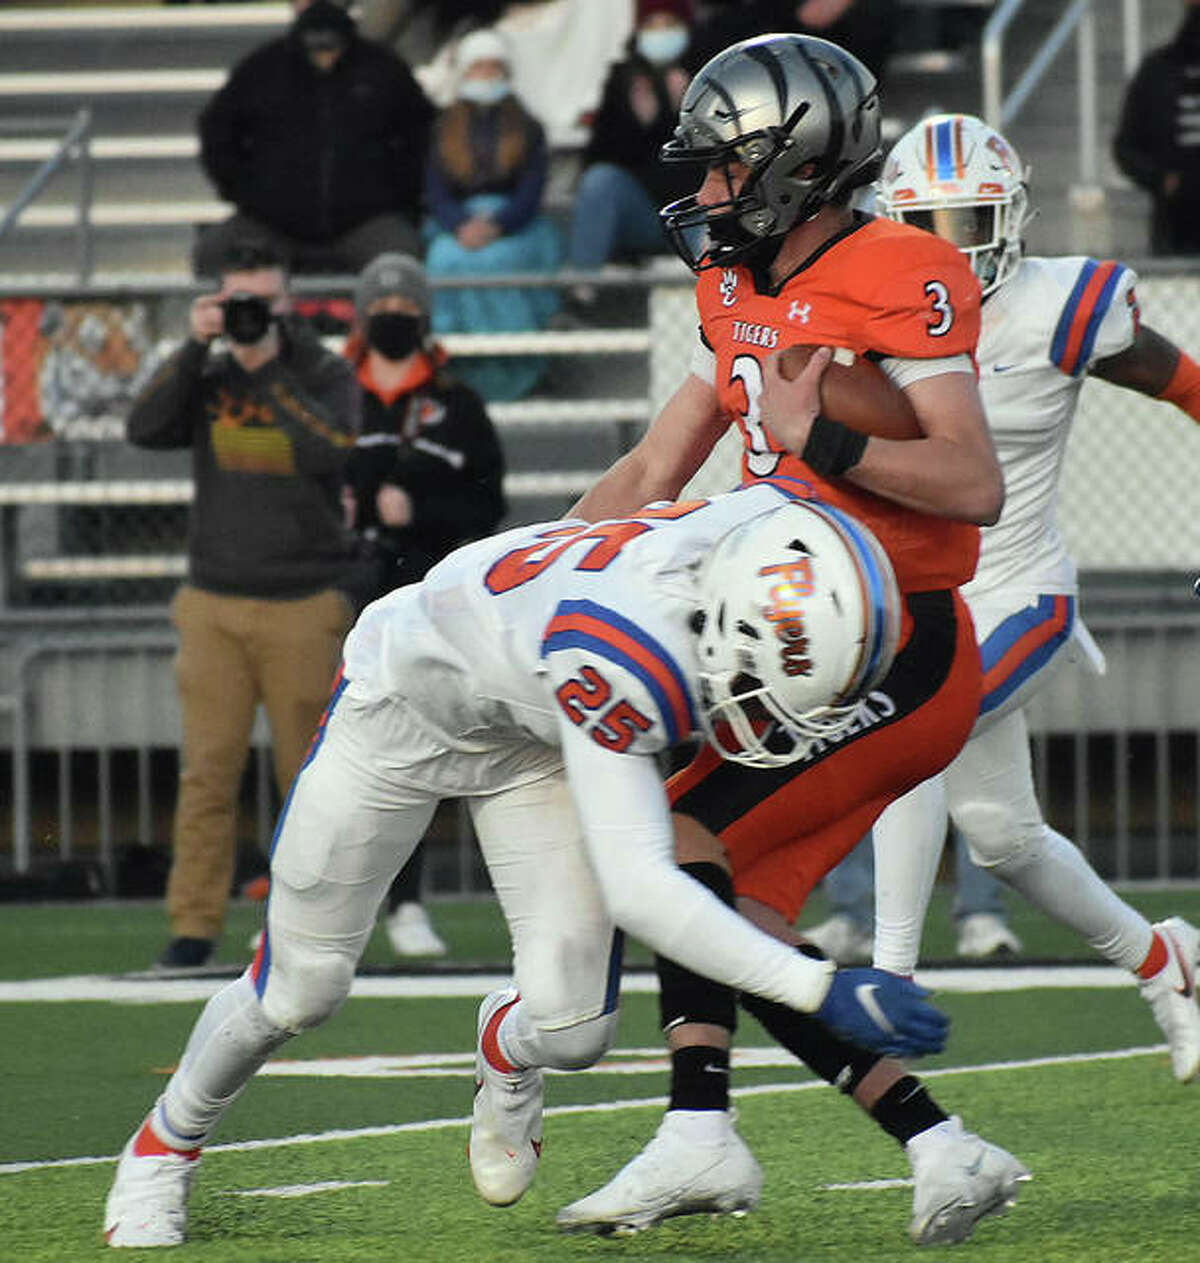 Edwardsville quarterback Ryan Hampton is tackled by East St. Louis safety Dallas Brown in the first quarter.